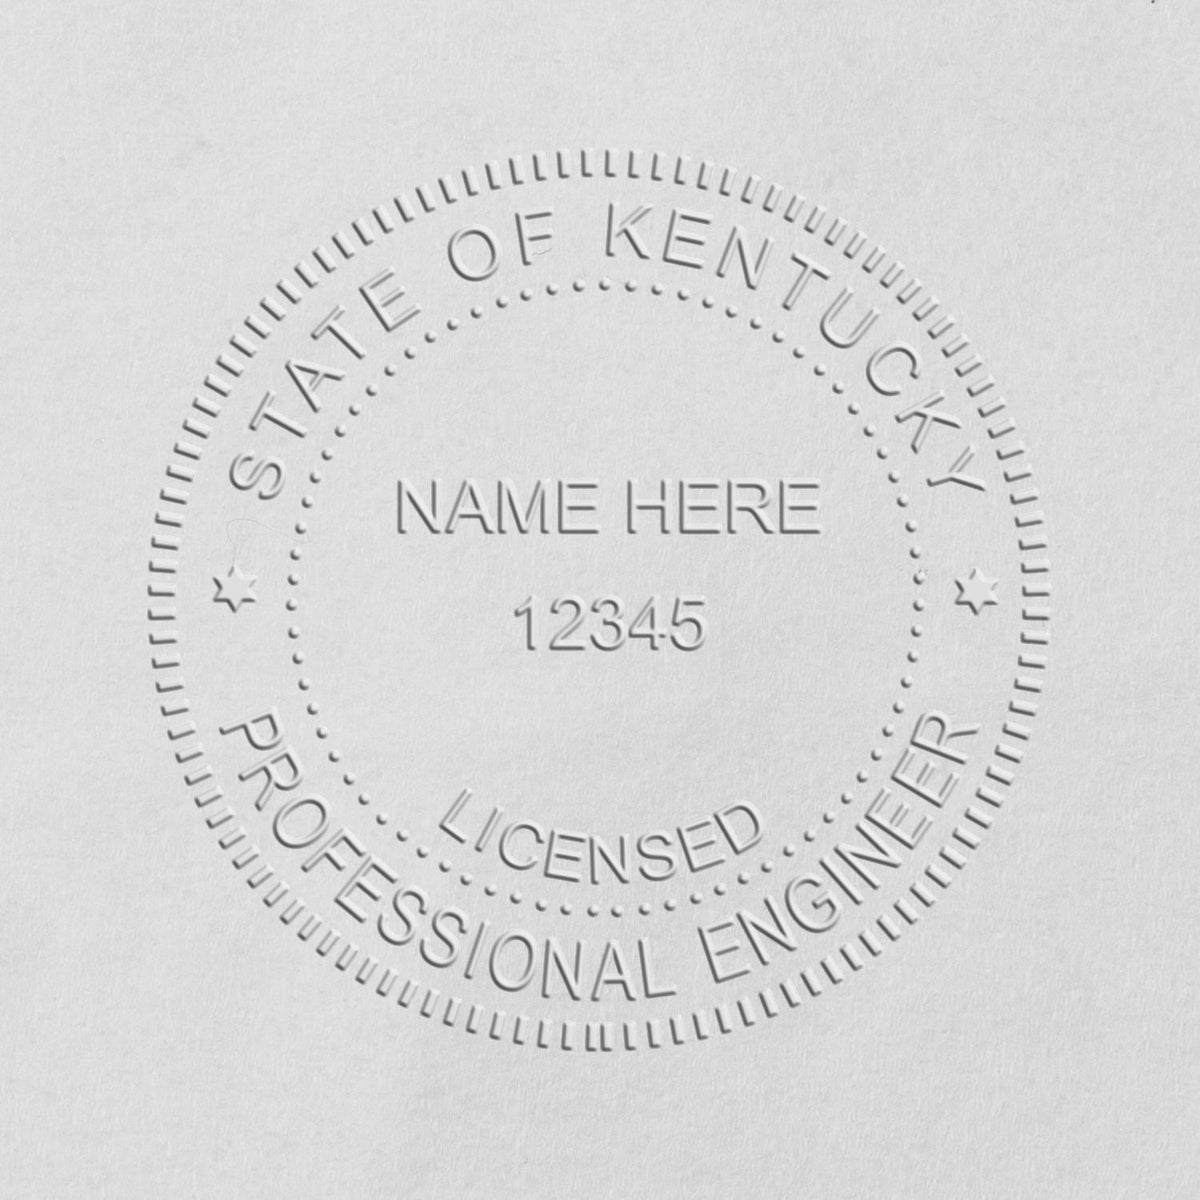 The Gift Kentucky Engineer Seal stamp impression comes to life with a crisp, detailed image stamped on paper - showcasing true professional quality.